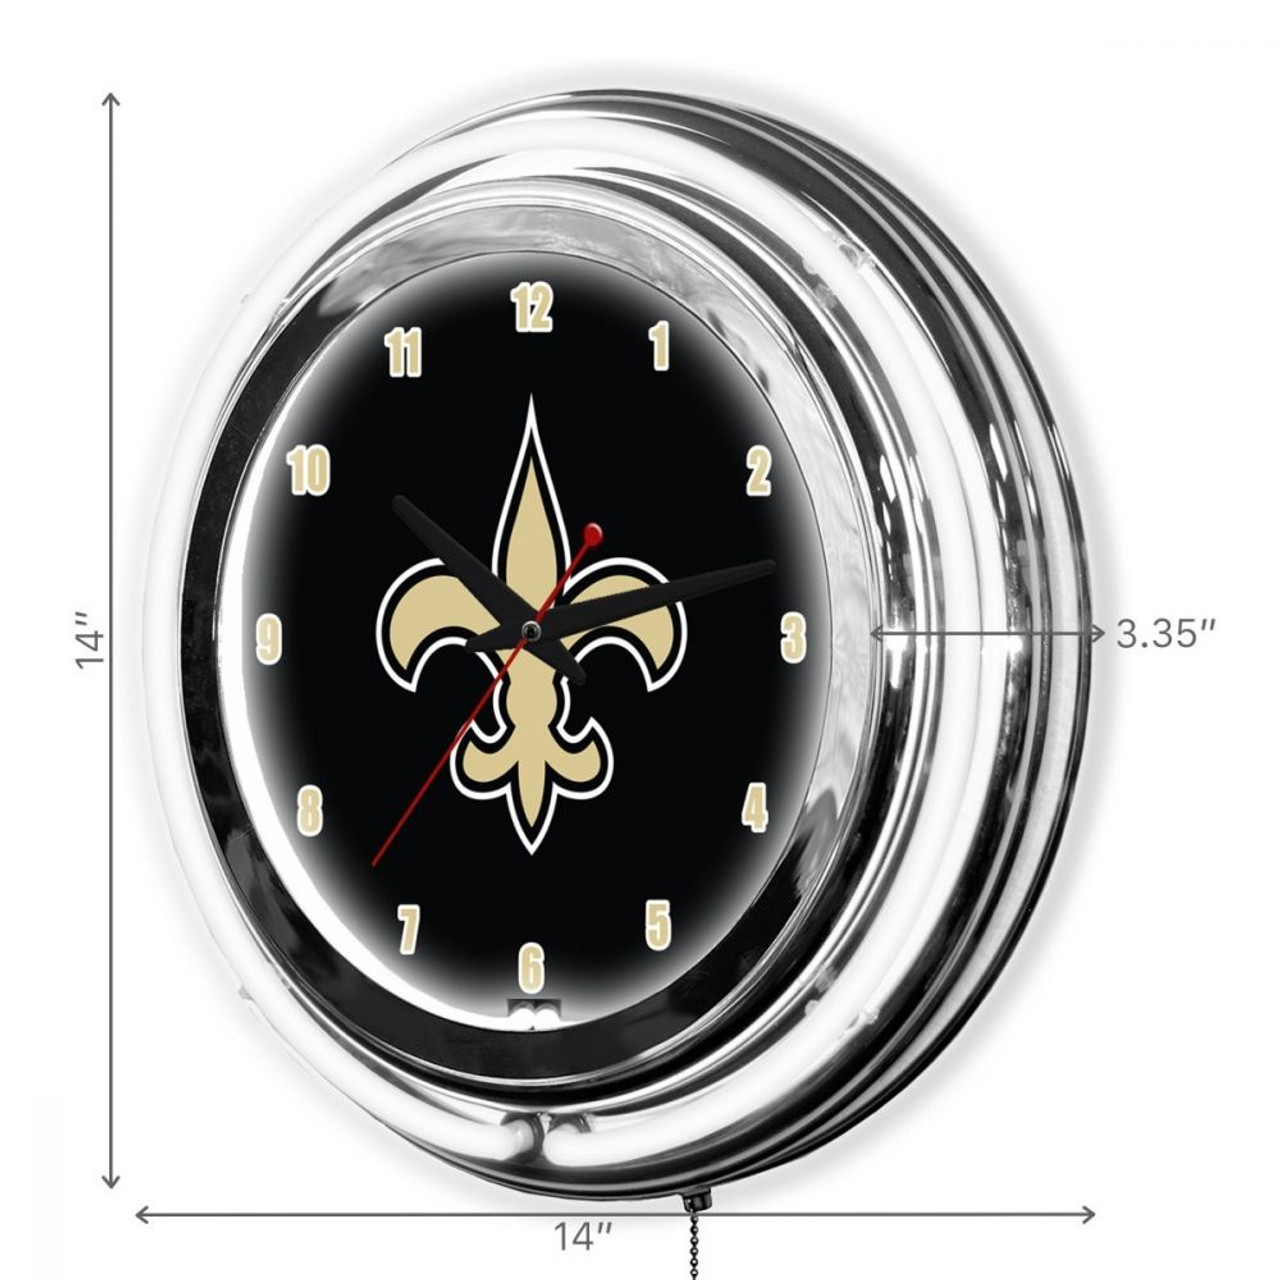 655-1031, New Orleans, NO, NOLA, Saints, 14", Neon, Clock, NFL, Imperial, Logo, FREE SHIPPING